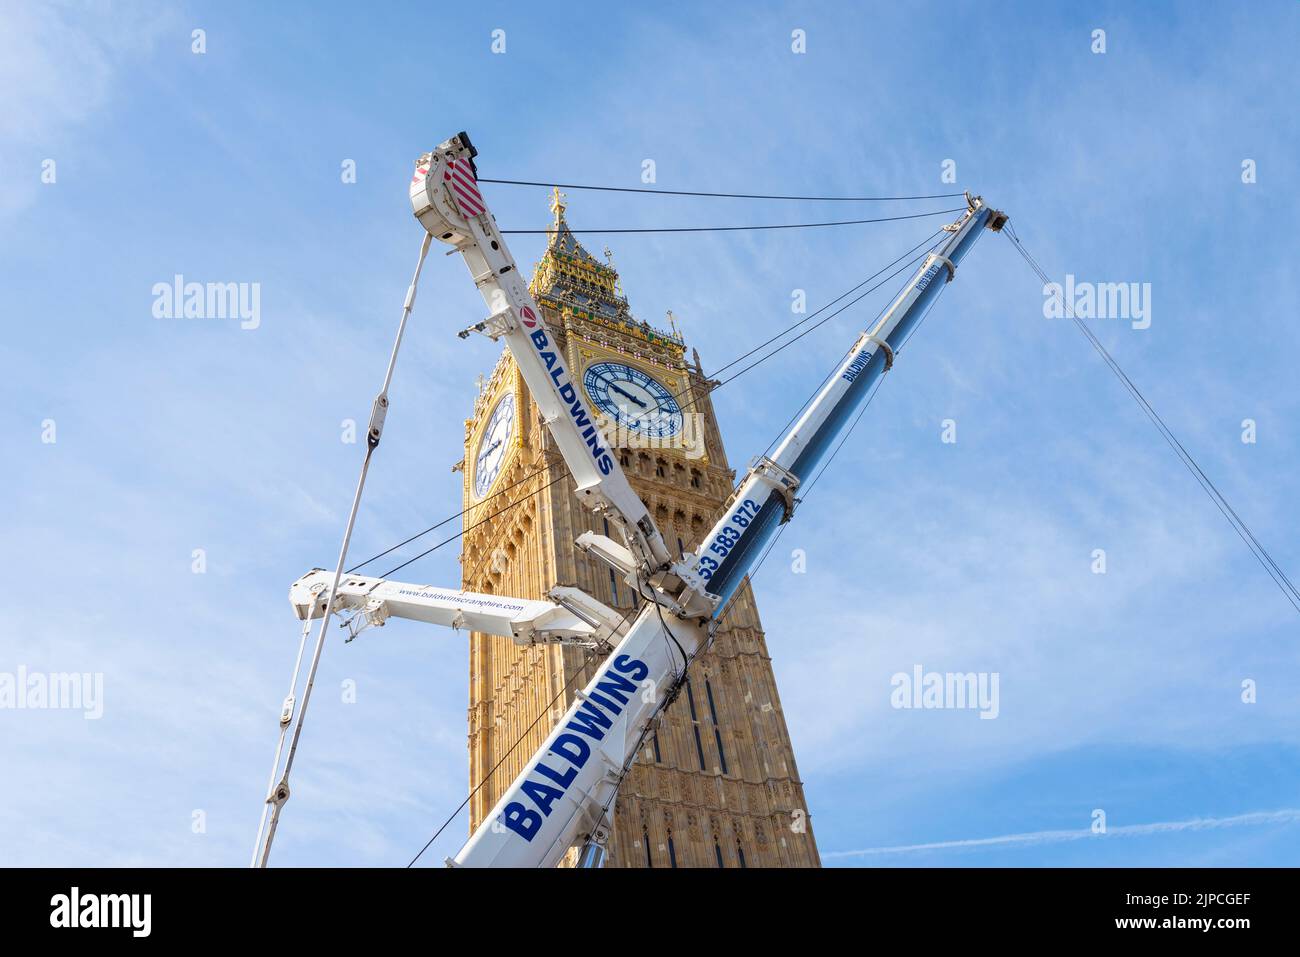 Large Baldwins crane removing the final sections of scaffolding from the restored Elizabeth Tower, Big Ben, of Palace of Westminster, London, UK Stock Photo